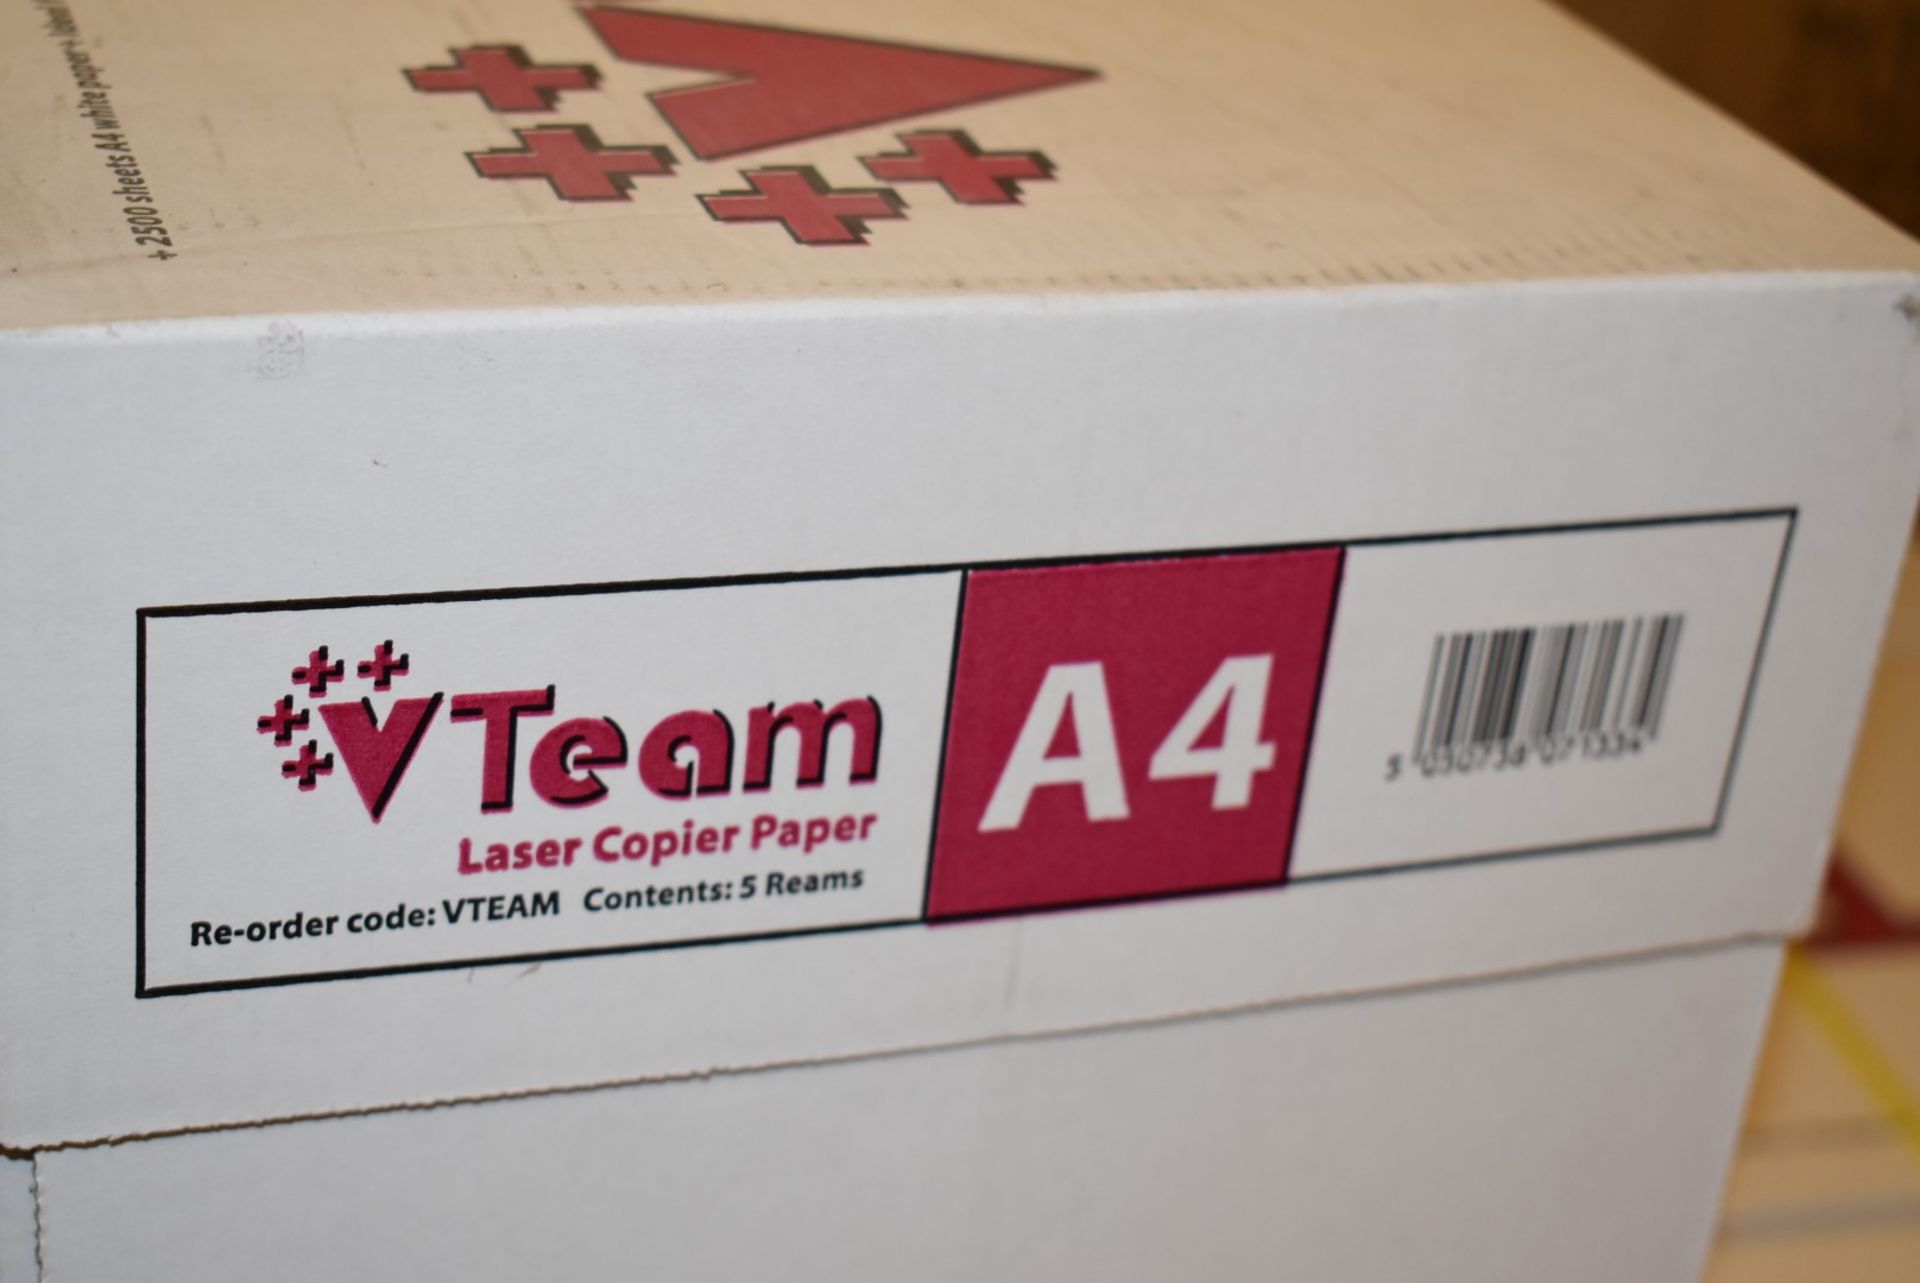 10 x Packs of Vteam A4 Laser Copy Paper - 500 Sheets Per Pack - Includes 2 x Boxes of 5 x Reams - Image 3 of 6